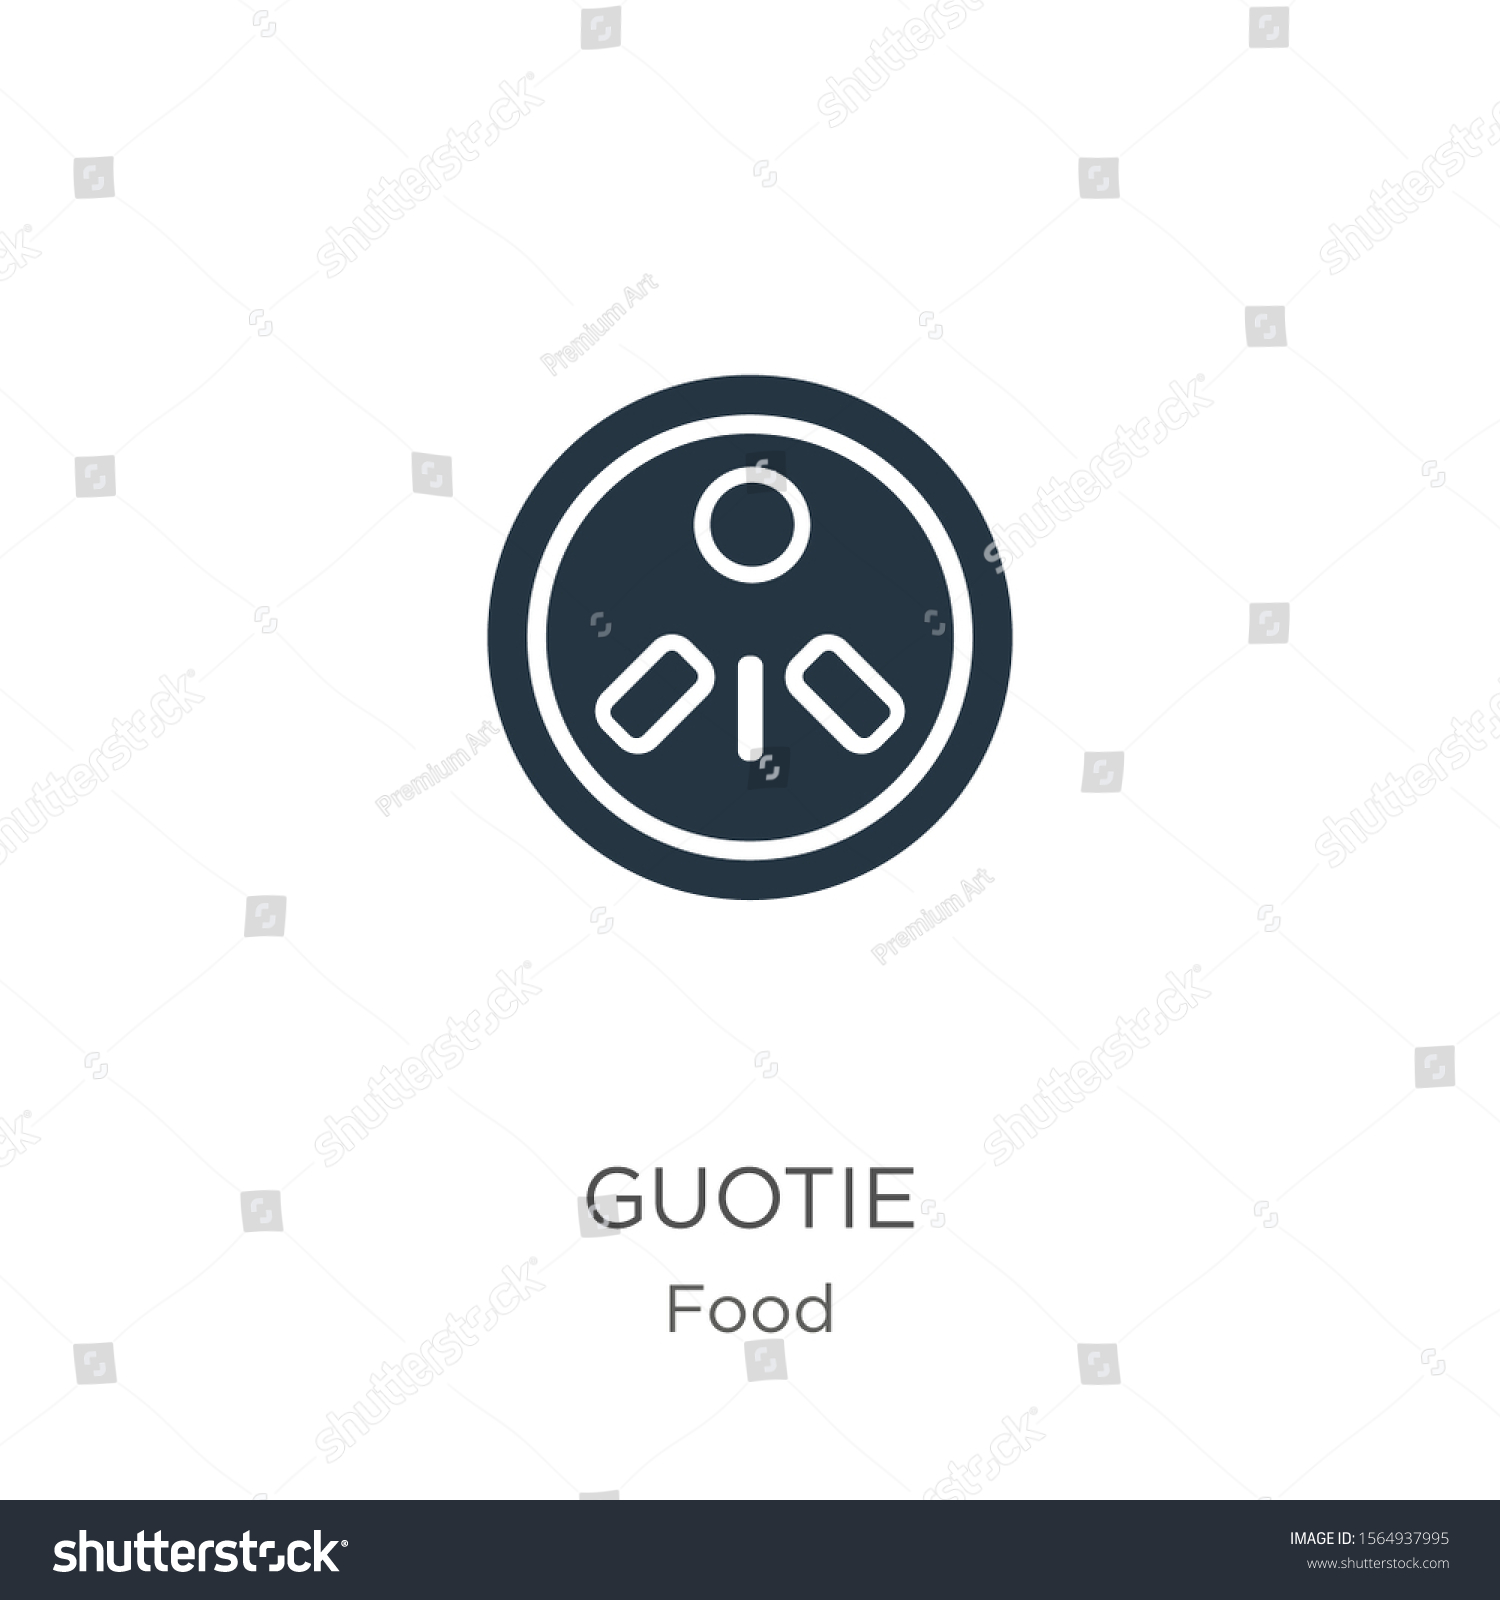 SVG of Guotie icon vector. Trendy flat guotie icon from food collection isolated on white background. Vector illustration can be used for web and mobile graphic design, logo, eps10 svg